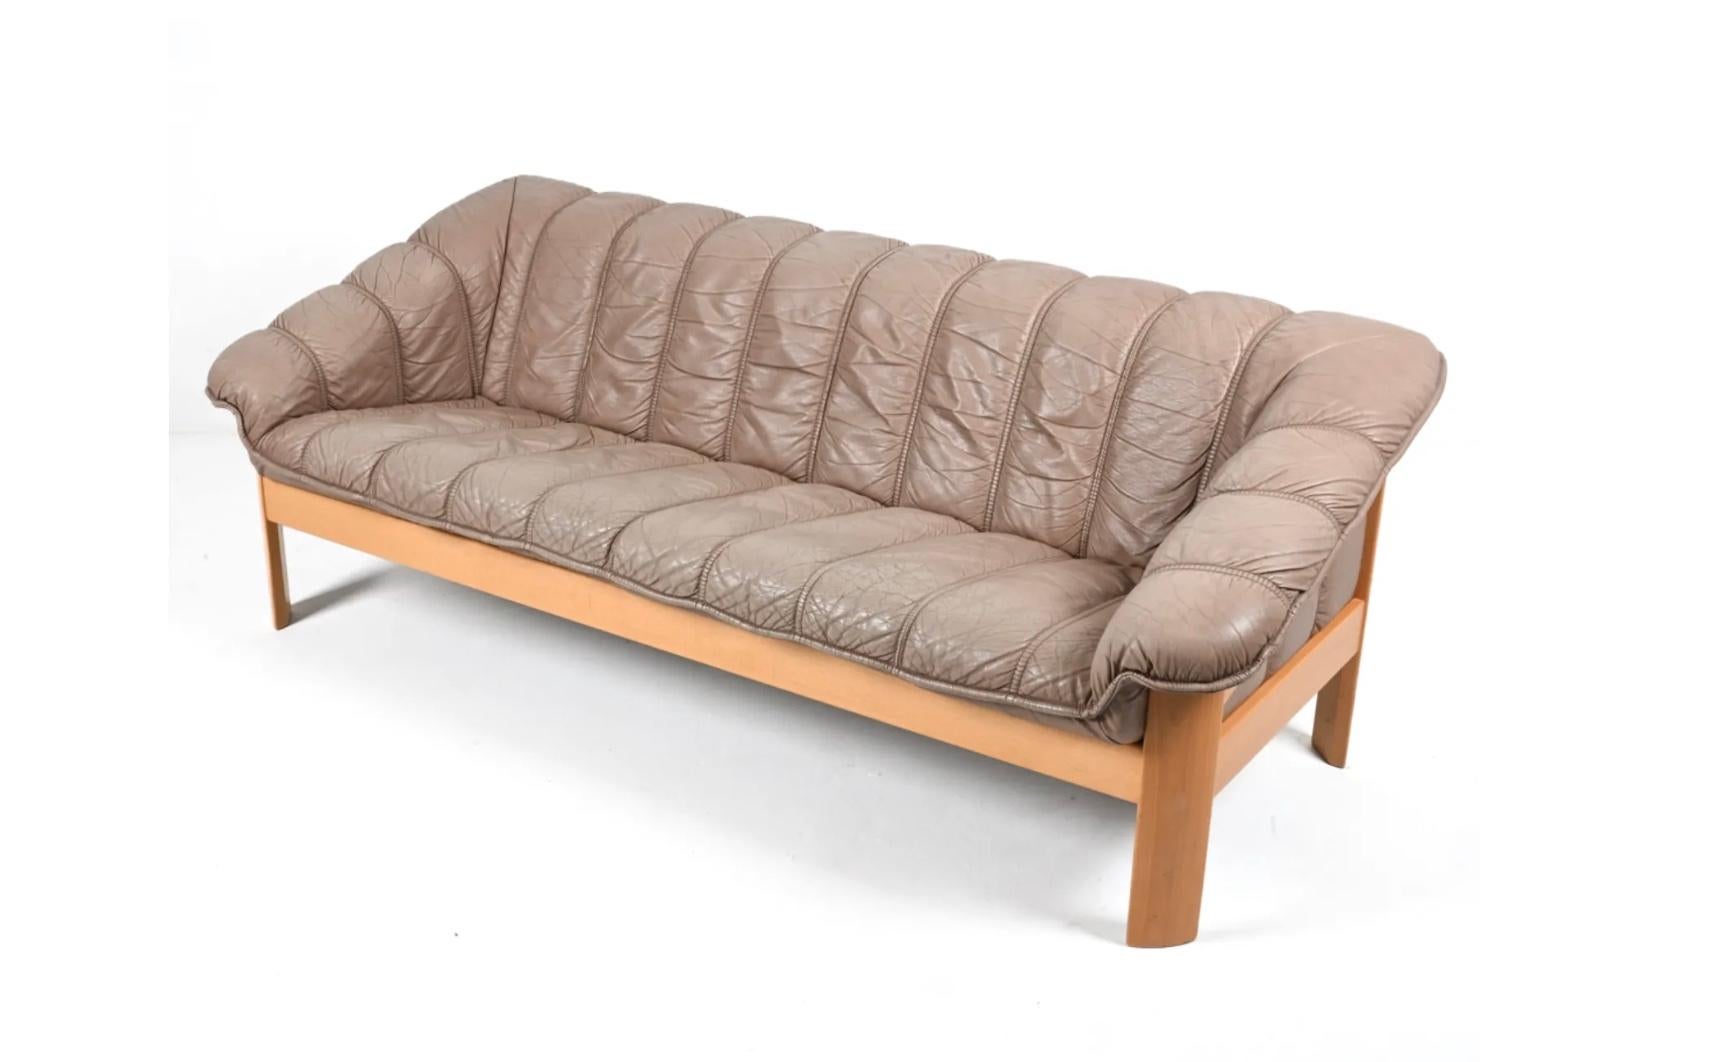 Mid-century Norwegian Post Modern Ekornes leather teak sofa. Great light brown/tan leather with solid Blonde birch wood frames. Beautiful condition and very comfortable. Great Norwegian design. Good vintage condition shows normal wear - very